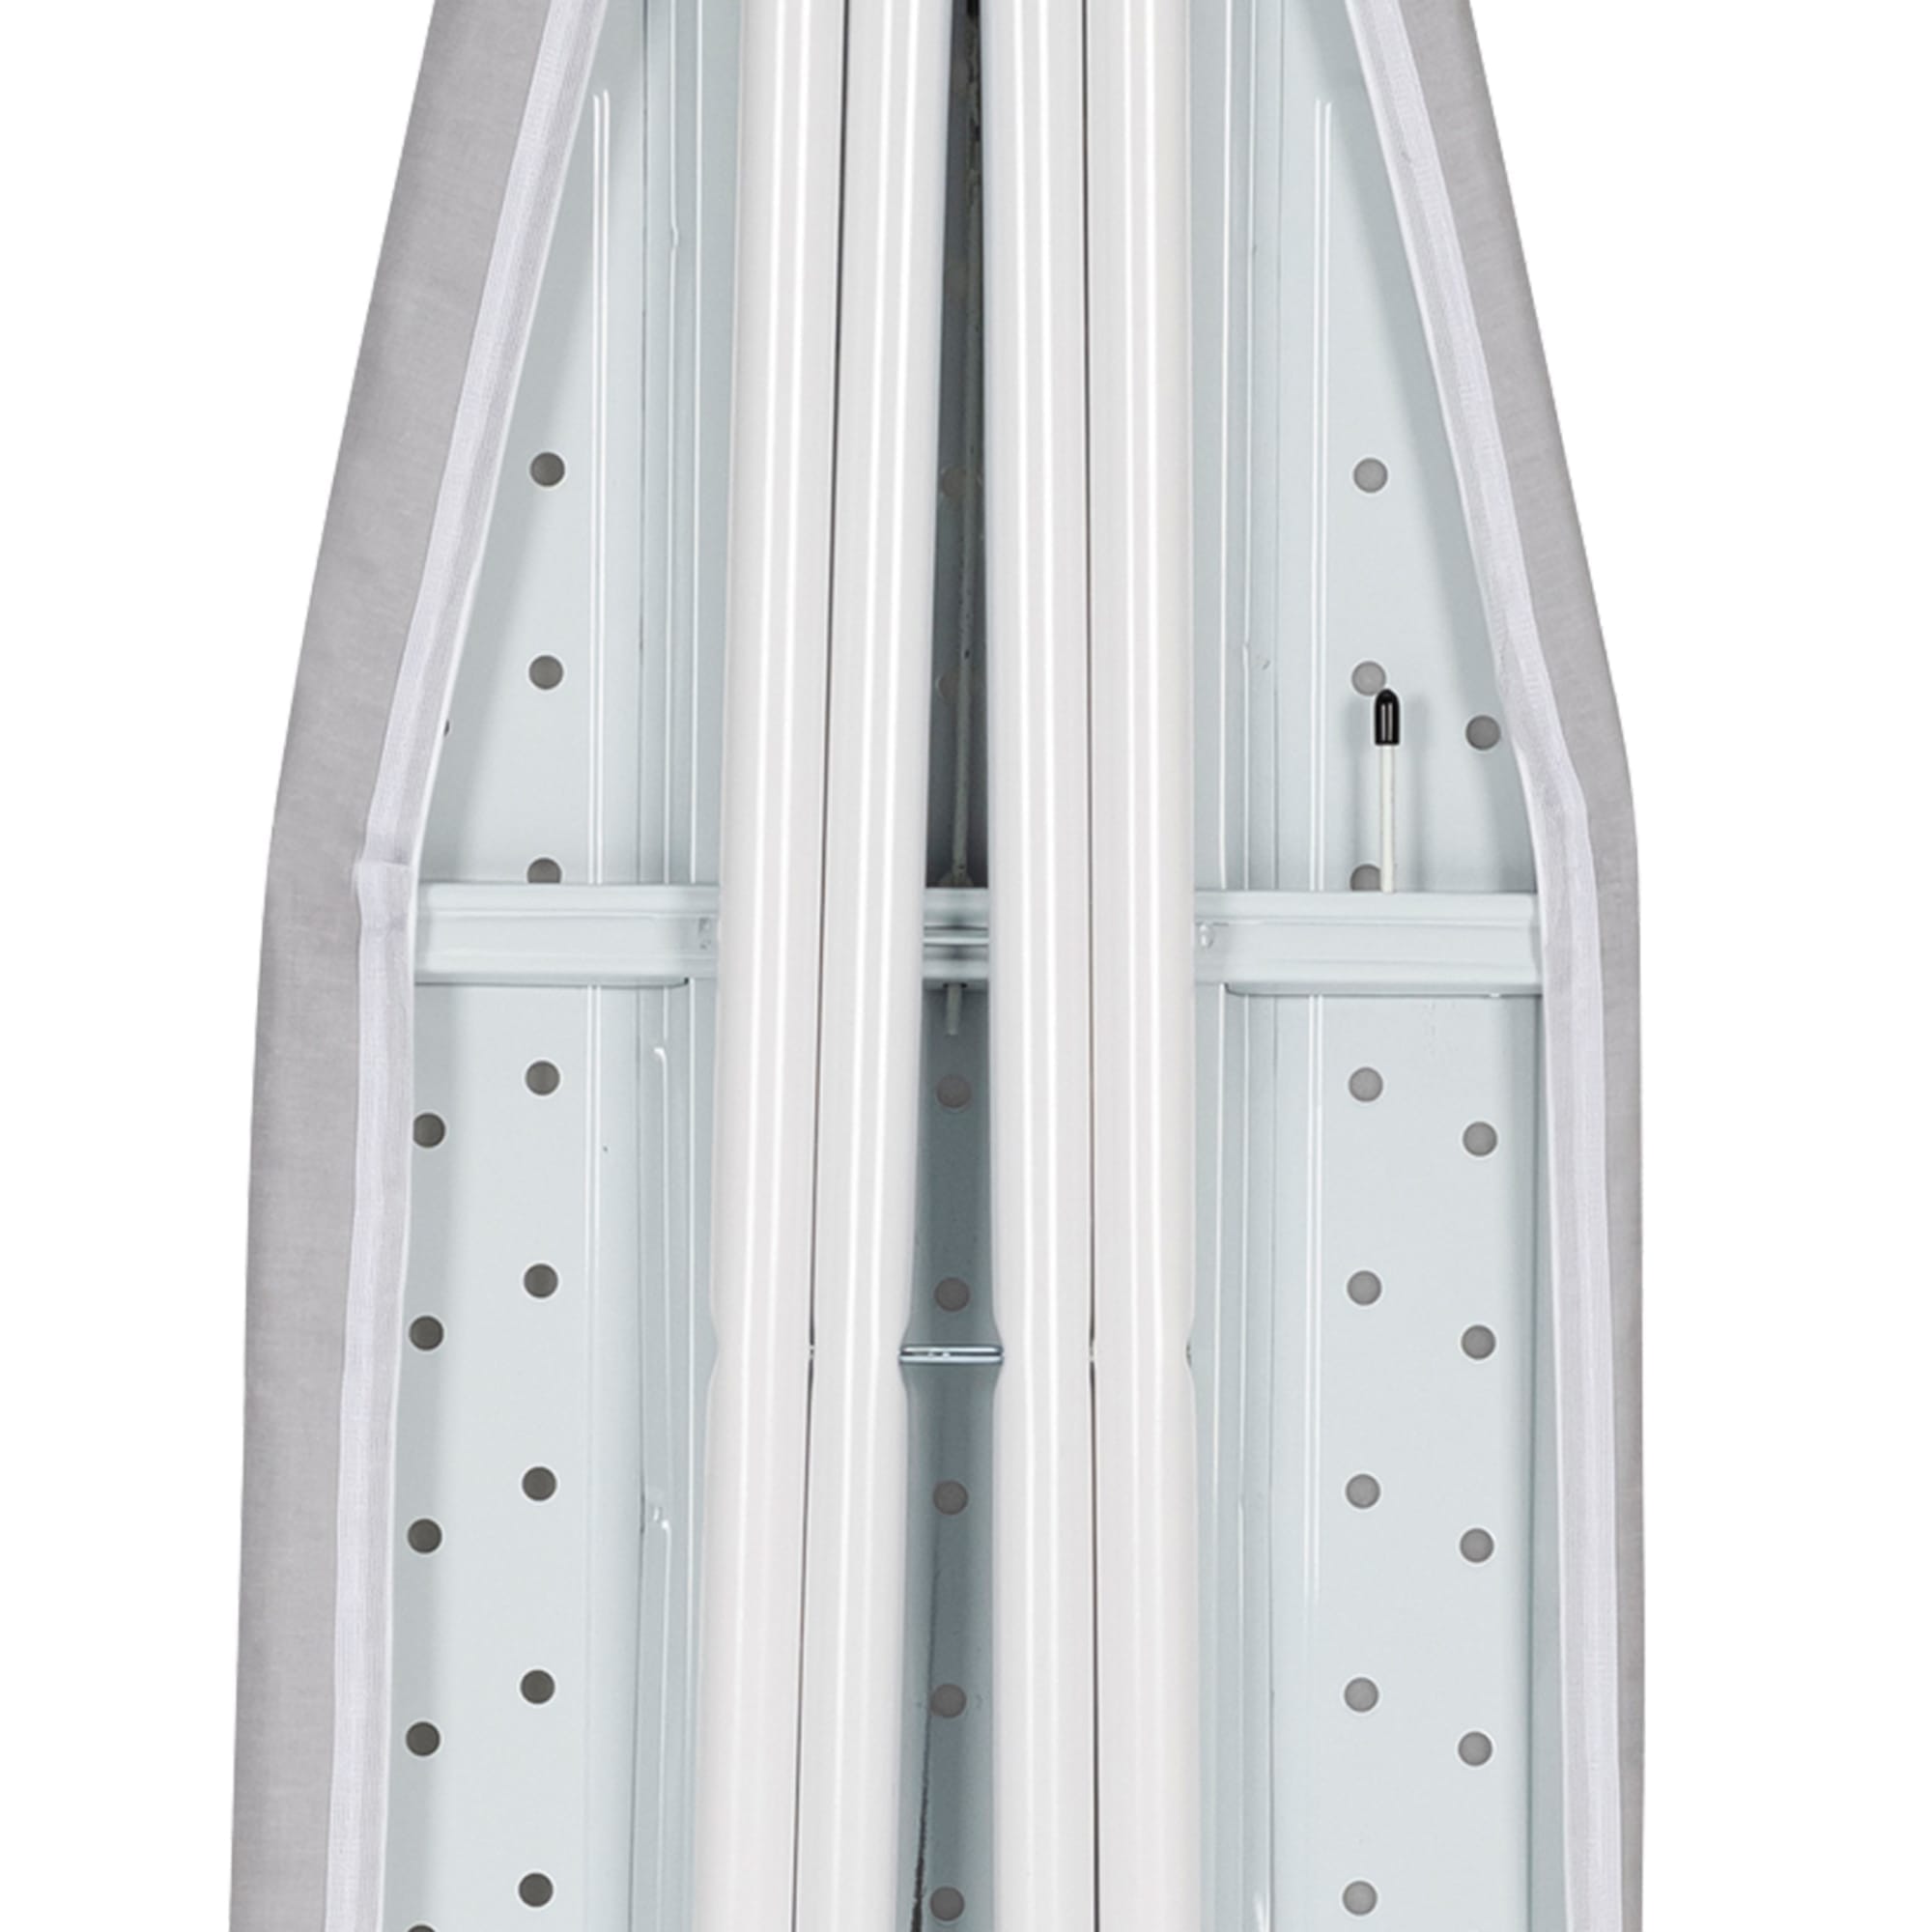 Seymour Home Products Adjustable Height, 4-Leg Ironing Board With Perforated Top, Light Grey (4 Pack) $30.00 EACH, CASE PACK OF 4